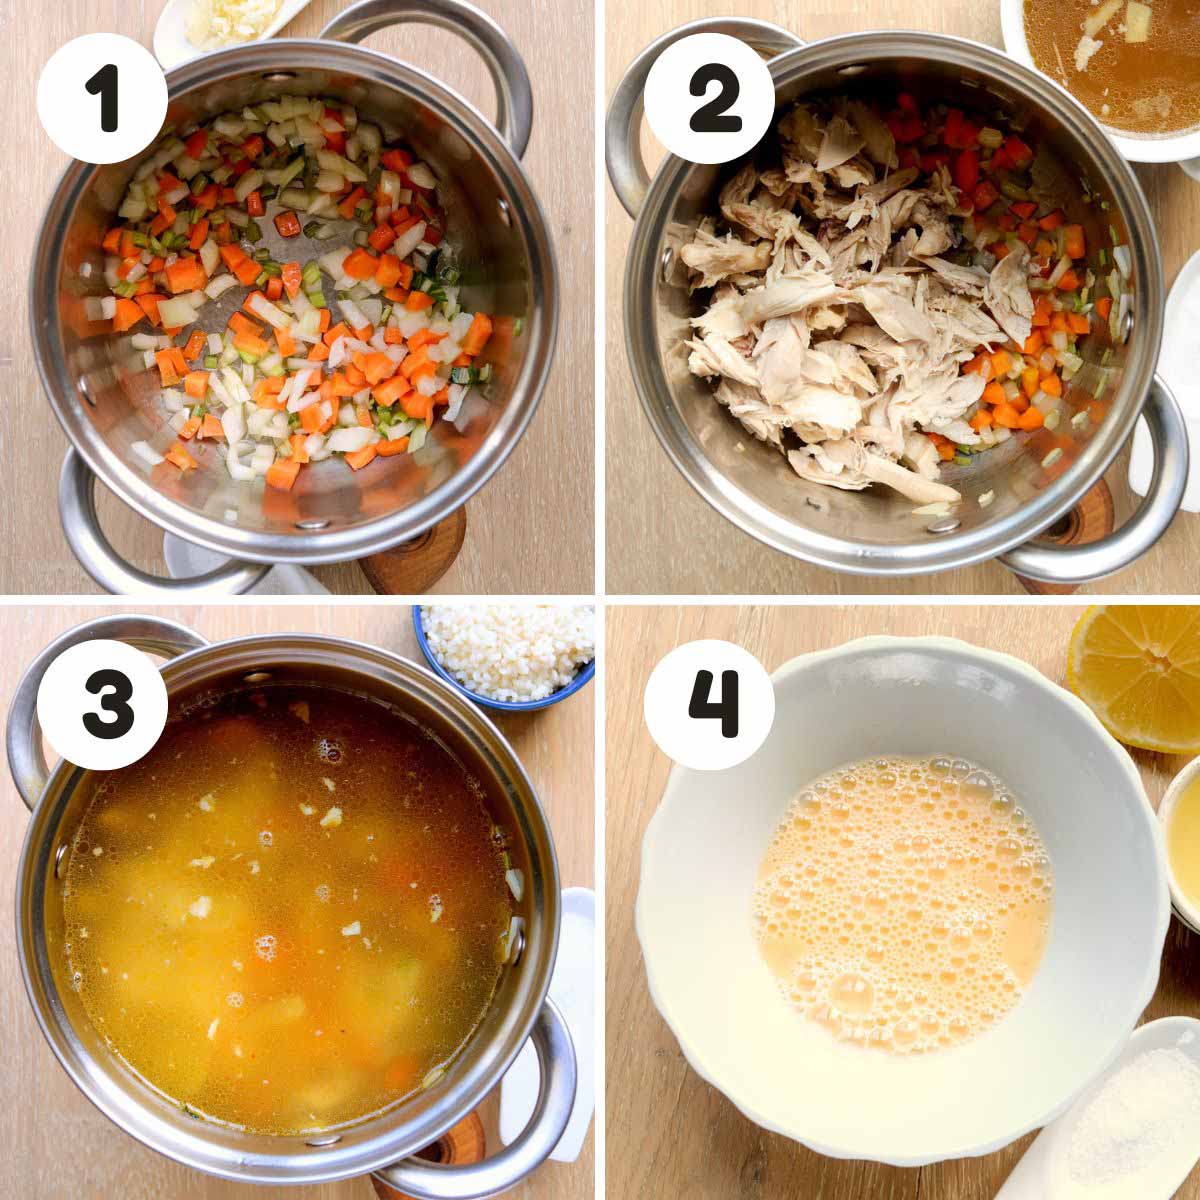 Steps to make the soup.